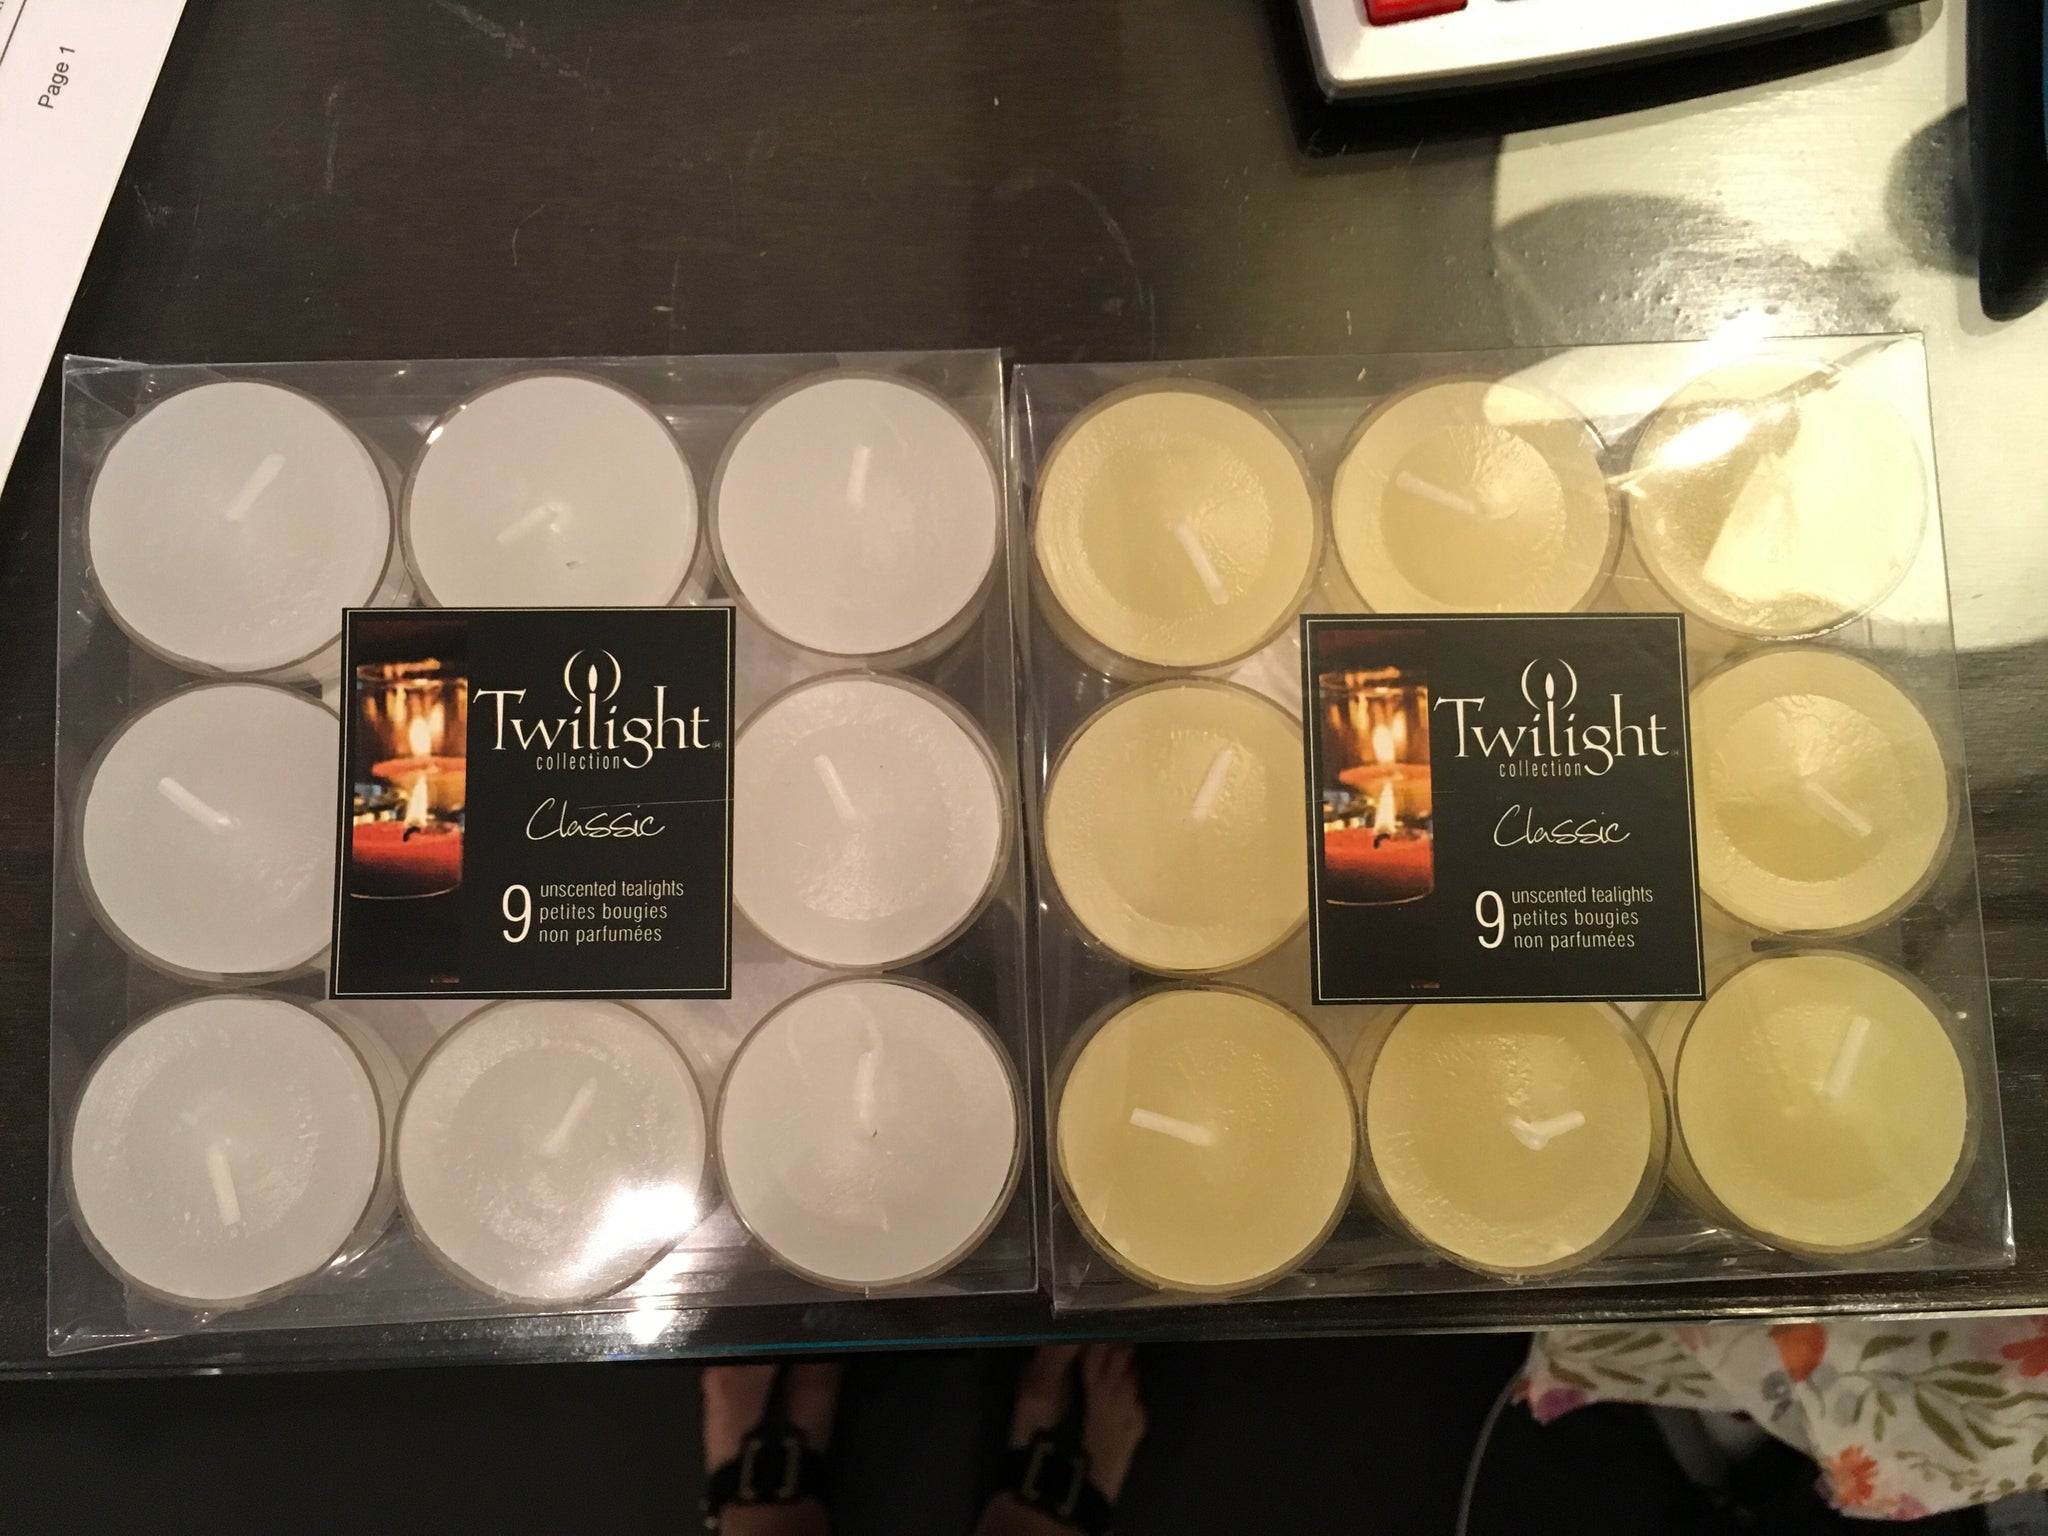 Assorted unscented tealights